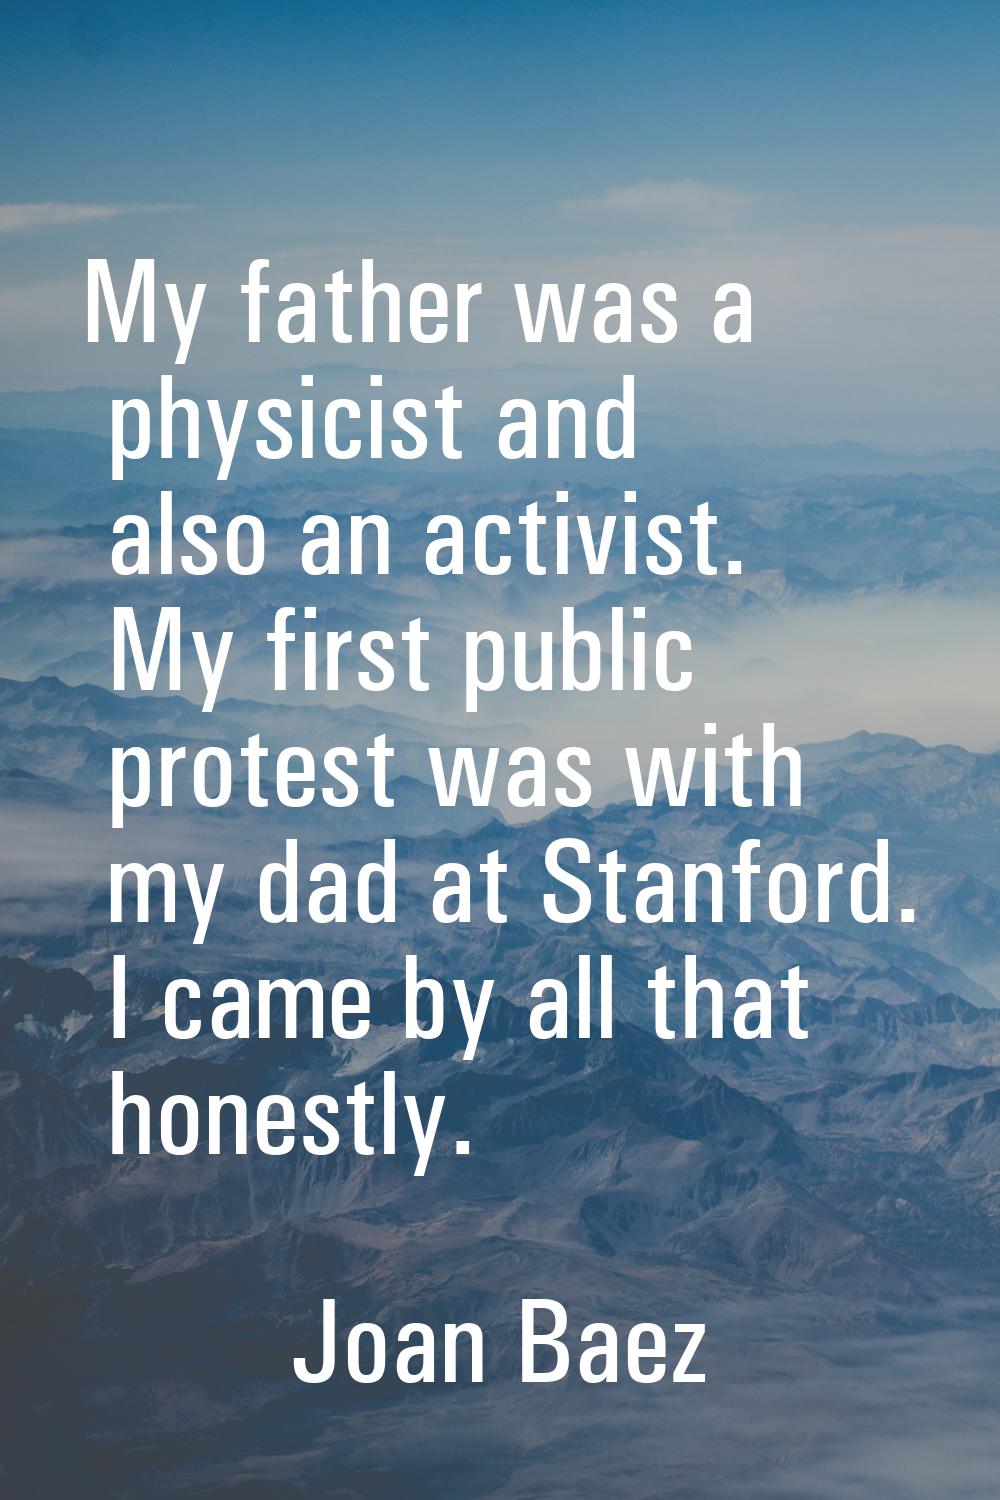 My father was a physicist and also an activist. My first public protest was with my dad at Stanford